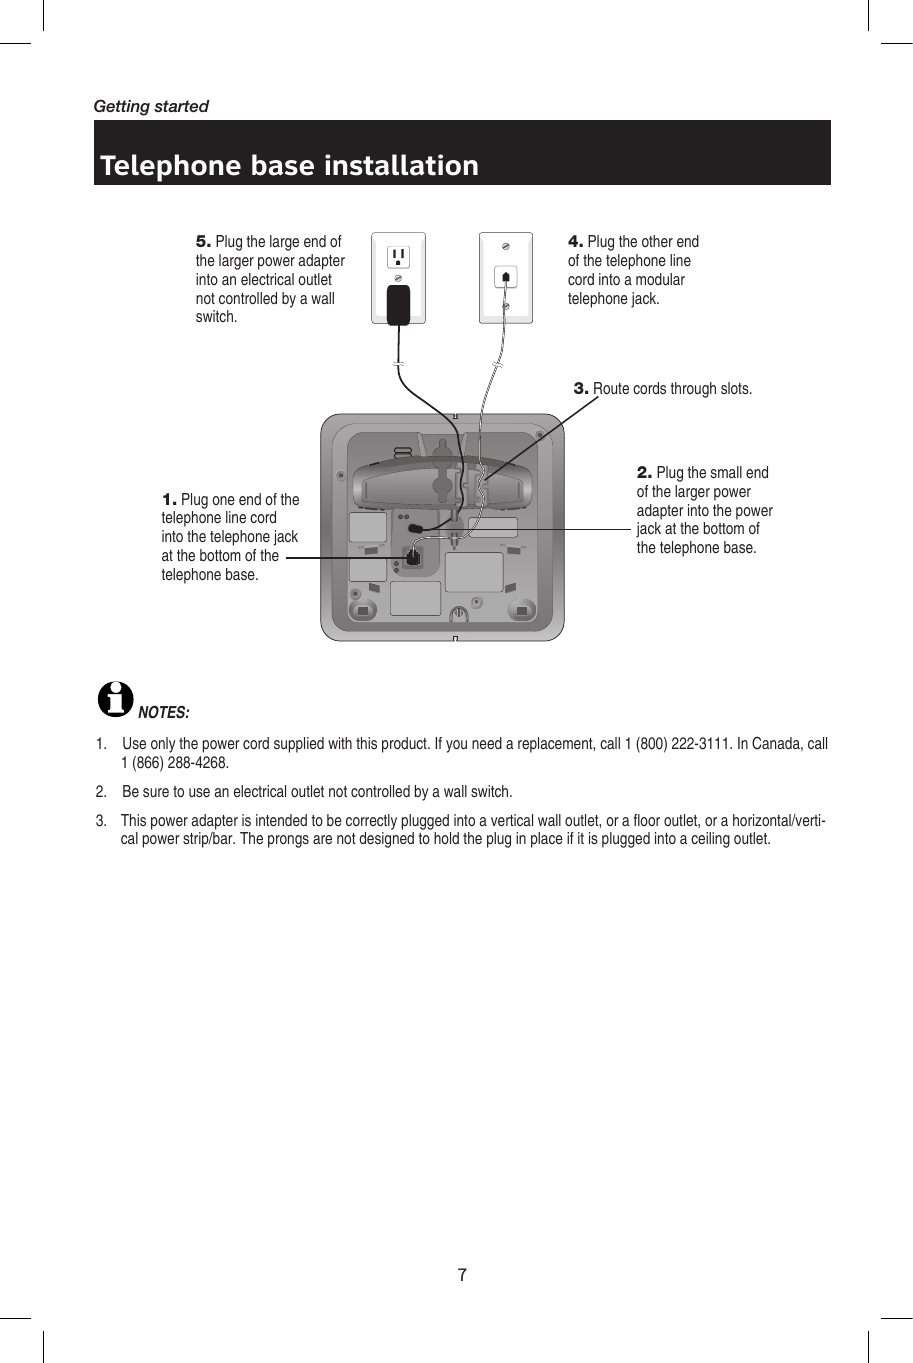 7Getting startedTelephone base installationNOTES: 1.    Use only the power cord supplied with this product. If you need a replacement, call 1 (800) 222-3111. In Canada, call 1 (866) 288-4268. 2.    Be sure to use an electrical outlet not controlled by a wall switch.3.   This power adapter is intended to be correctly plugged into a vertical wall outlet, or a floor outlet, or a horizontal/verti-cal power strip/bar. The prongs are not designed to hold the plug in place if it is plugged into a ceiling outlet.5. Plug the large end of the larger power adapter into an electrical outlet not controlled by a wall switch.4. Plug the other end of the telephone line cord into a modular telephone jack.1. Plug one end of the telephone line cord into the telephone jack at the bottom of the telephone base.2. Plug the small end of the larger power adapter into the power jack at the bottom of the telephone base.3. Route cords through slots.